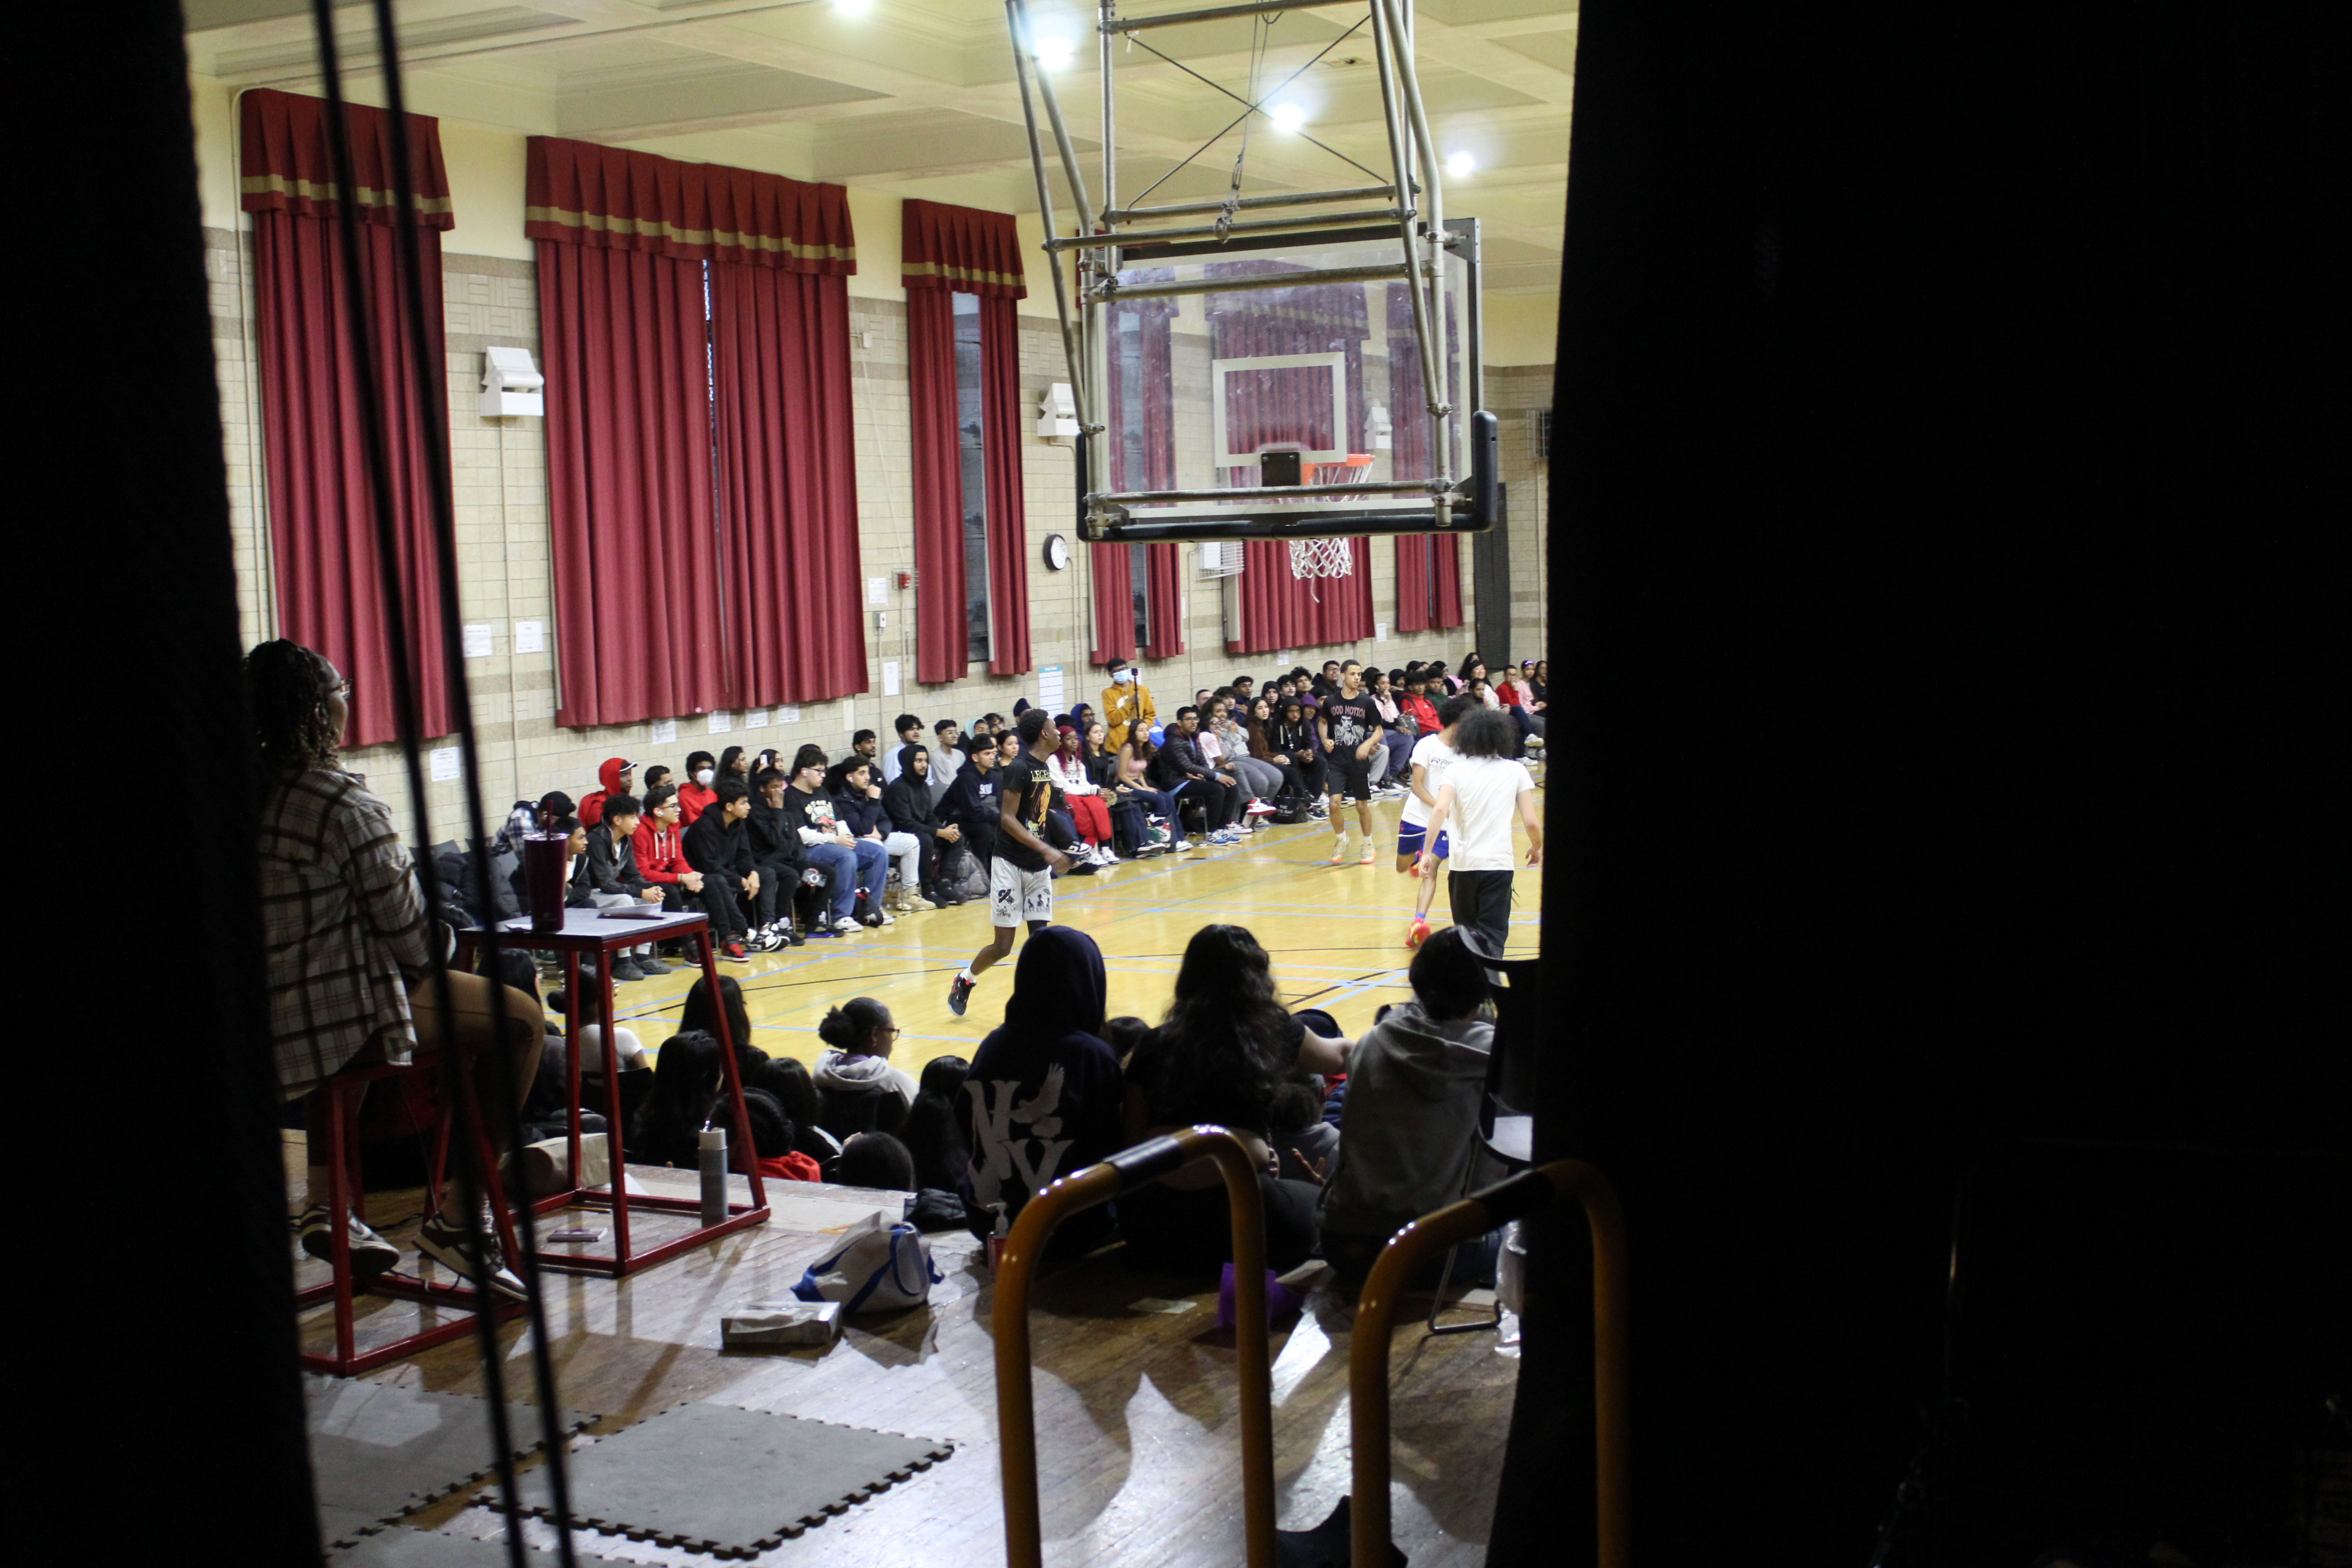 Students gather in the gym to watch the games